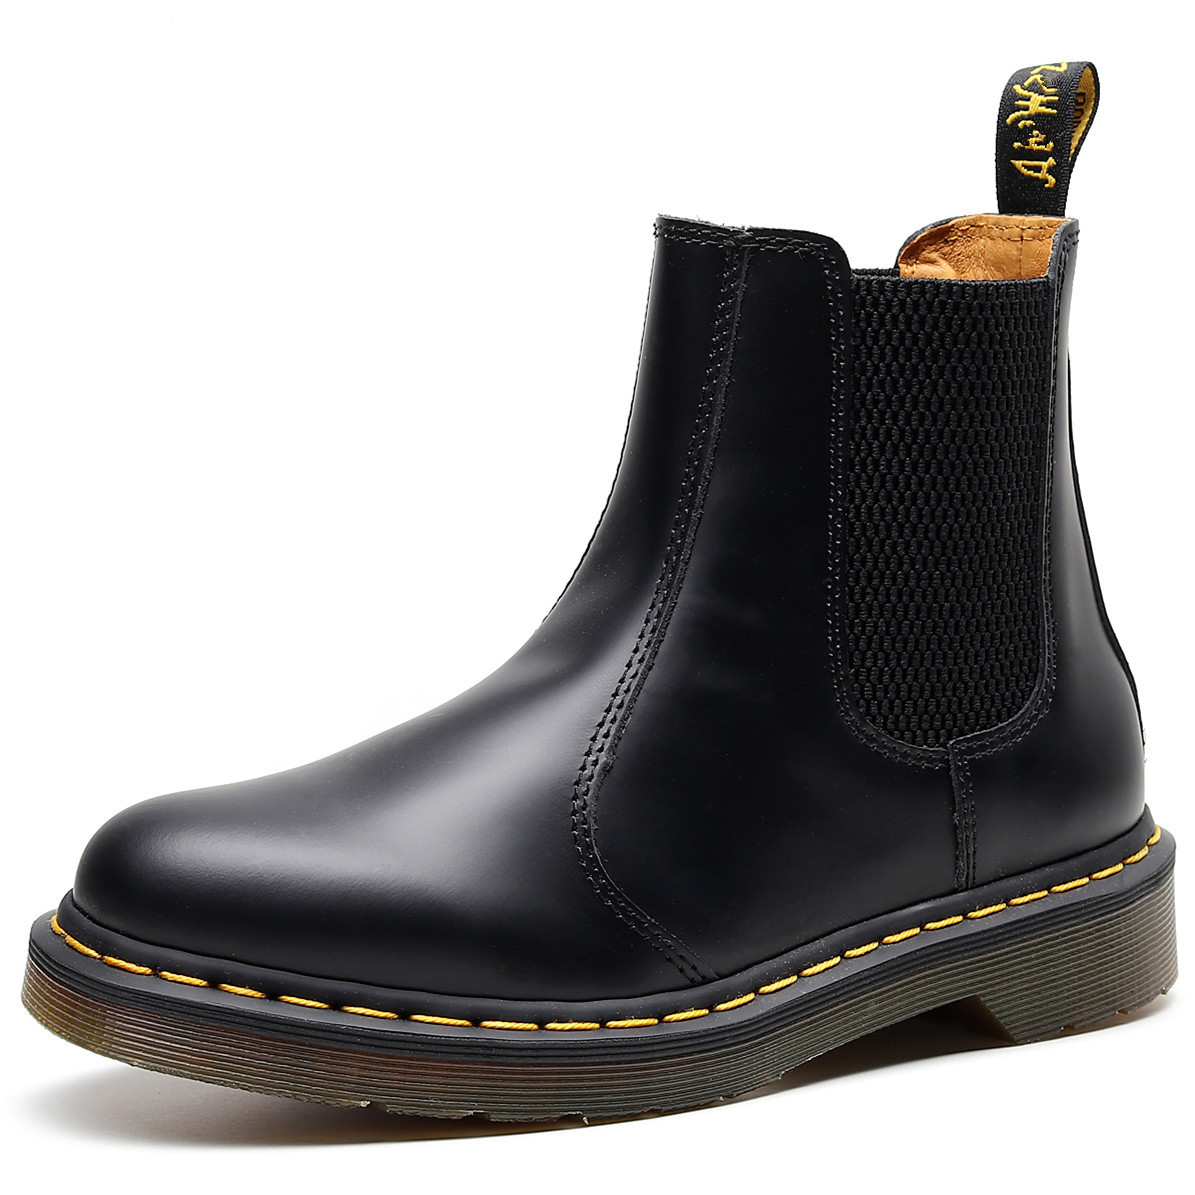 Cross-border 2976 Chelsea boots for wome...